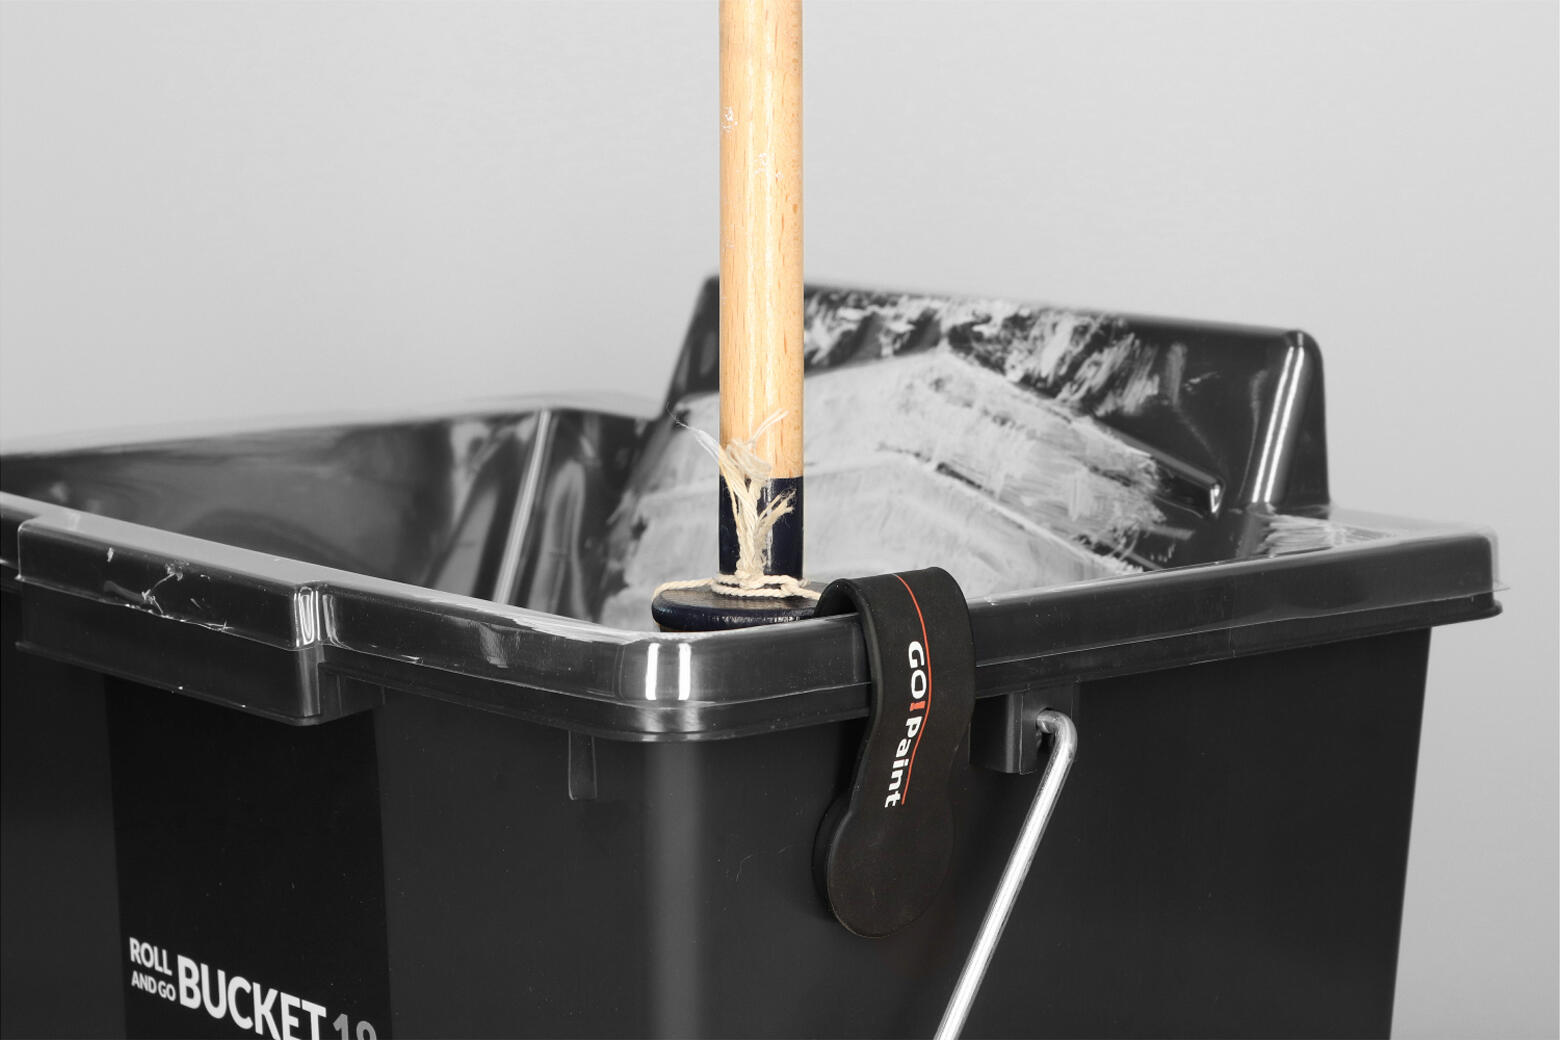 Fold the clip over the edge of a bucket and hang the brush on the side